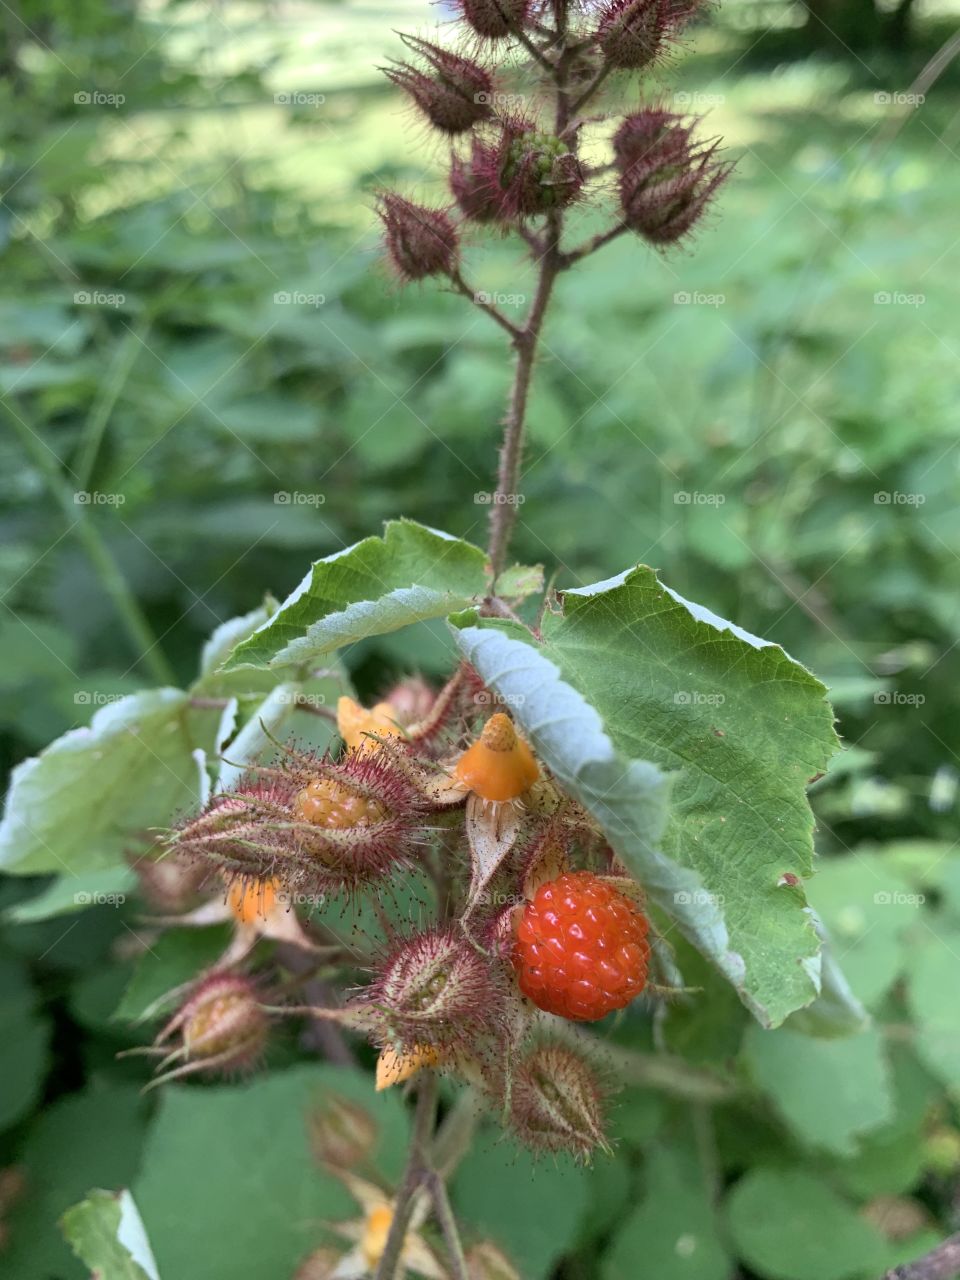 This picture was taken so I could check the plant on the internet to be sure that the “raspberries” we picking were edible. My young son, who’d just been to camp asked to see the picture and declared “those are wineberries and they’re edible.” 